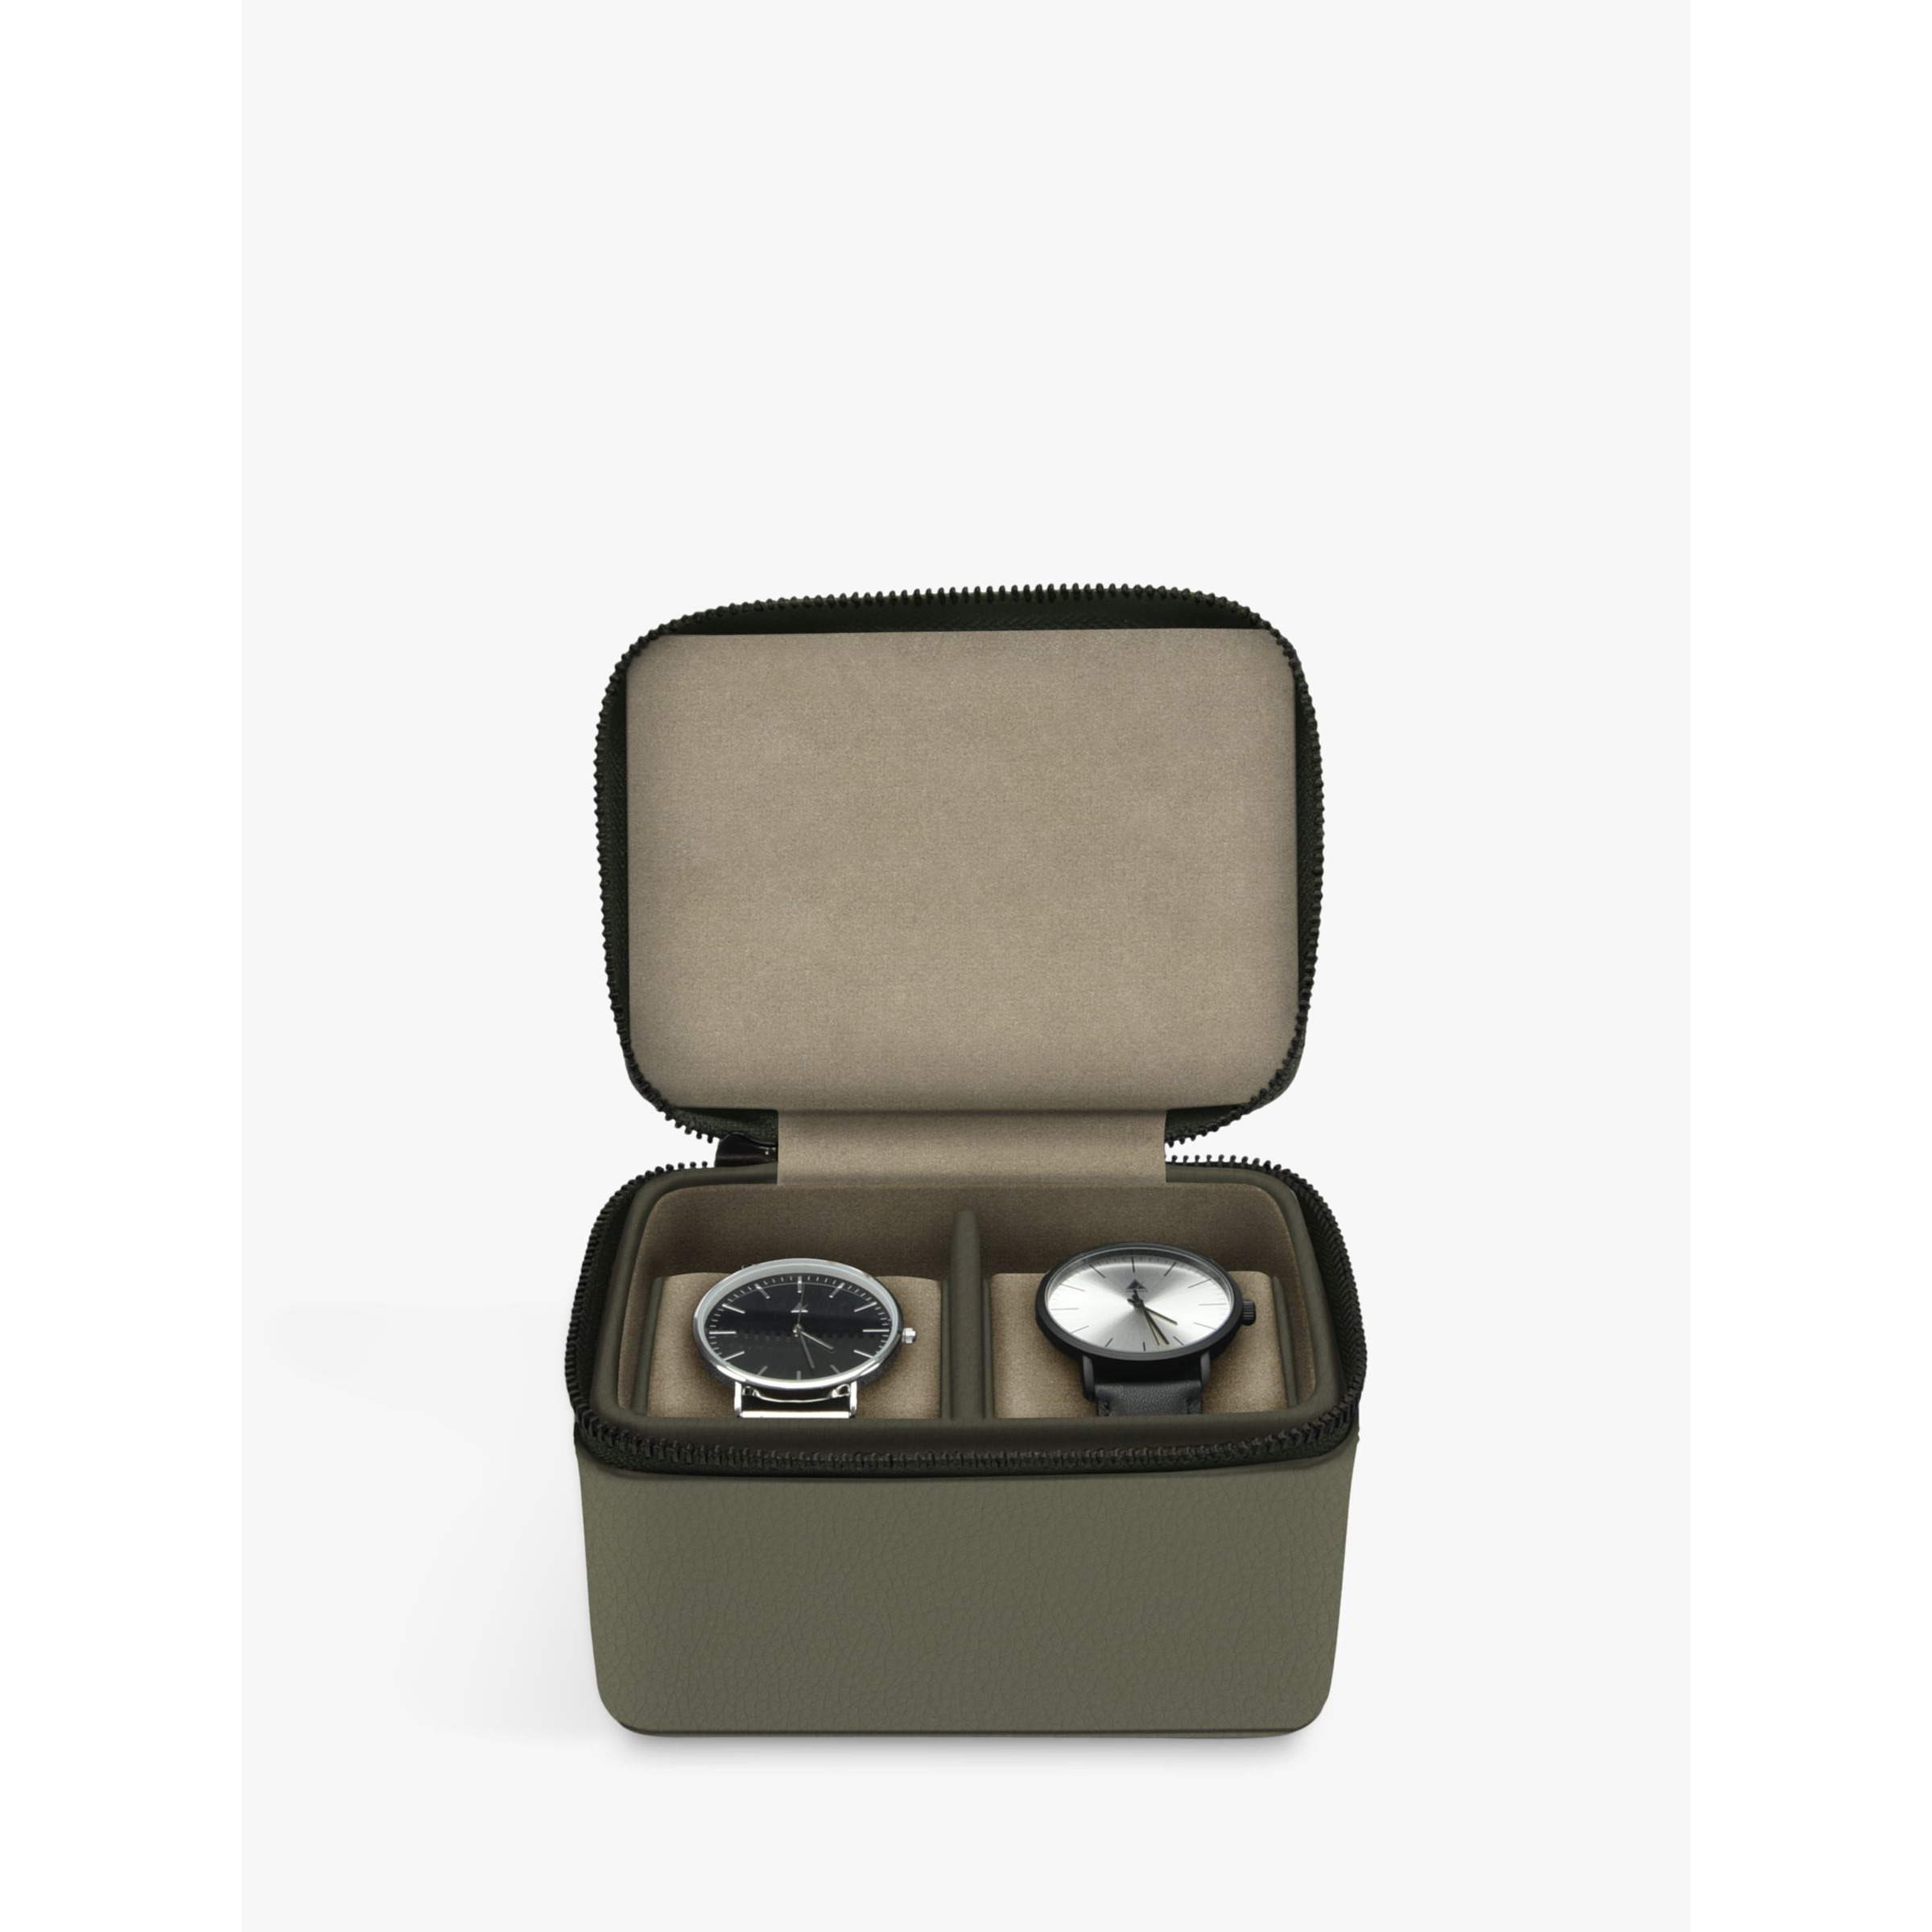 Stackers Double Watch Box - image 1